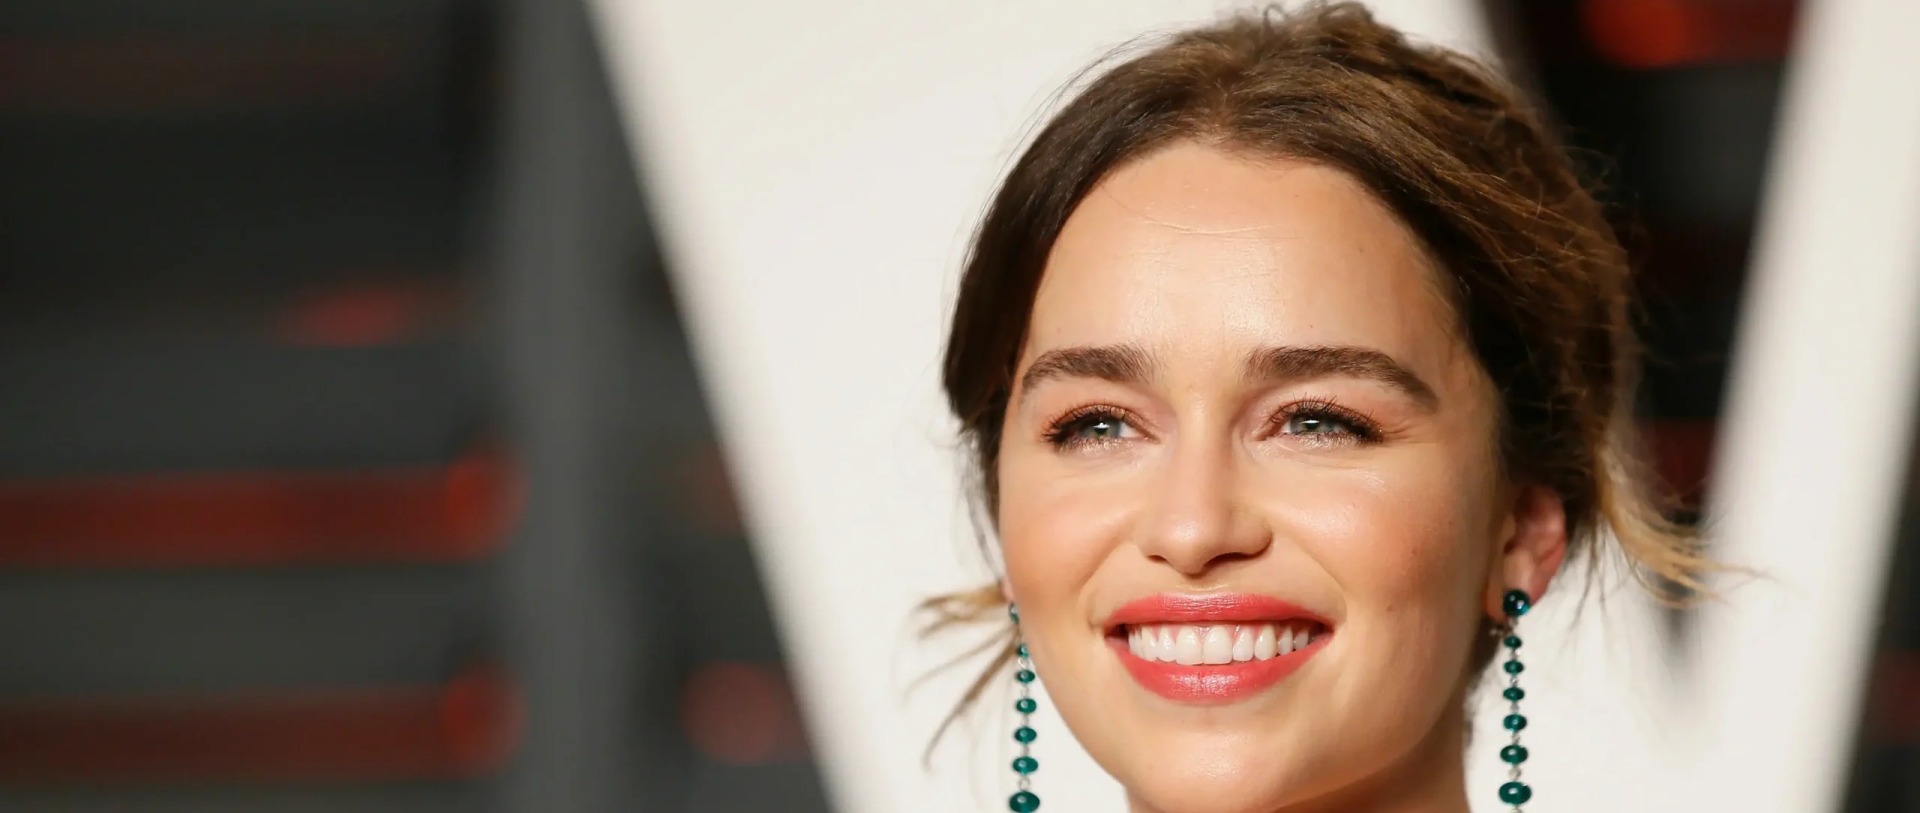 Emilia Clarke's Battle Behind the Scenes: Overcoming a Brain Injury While Filming Game of Thrones